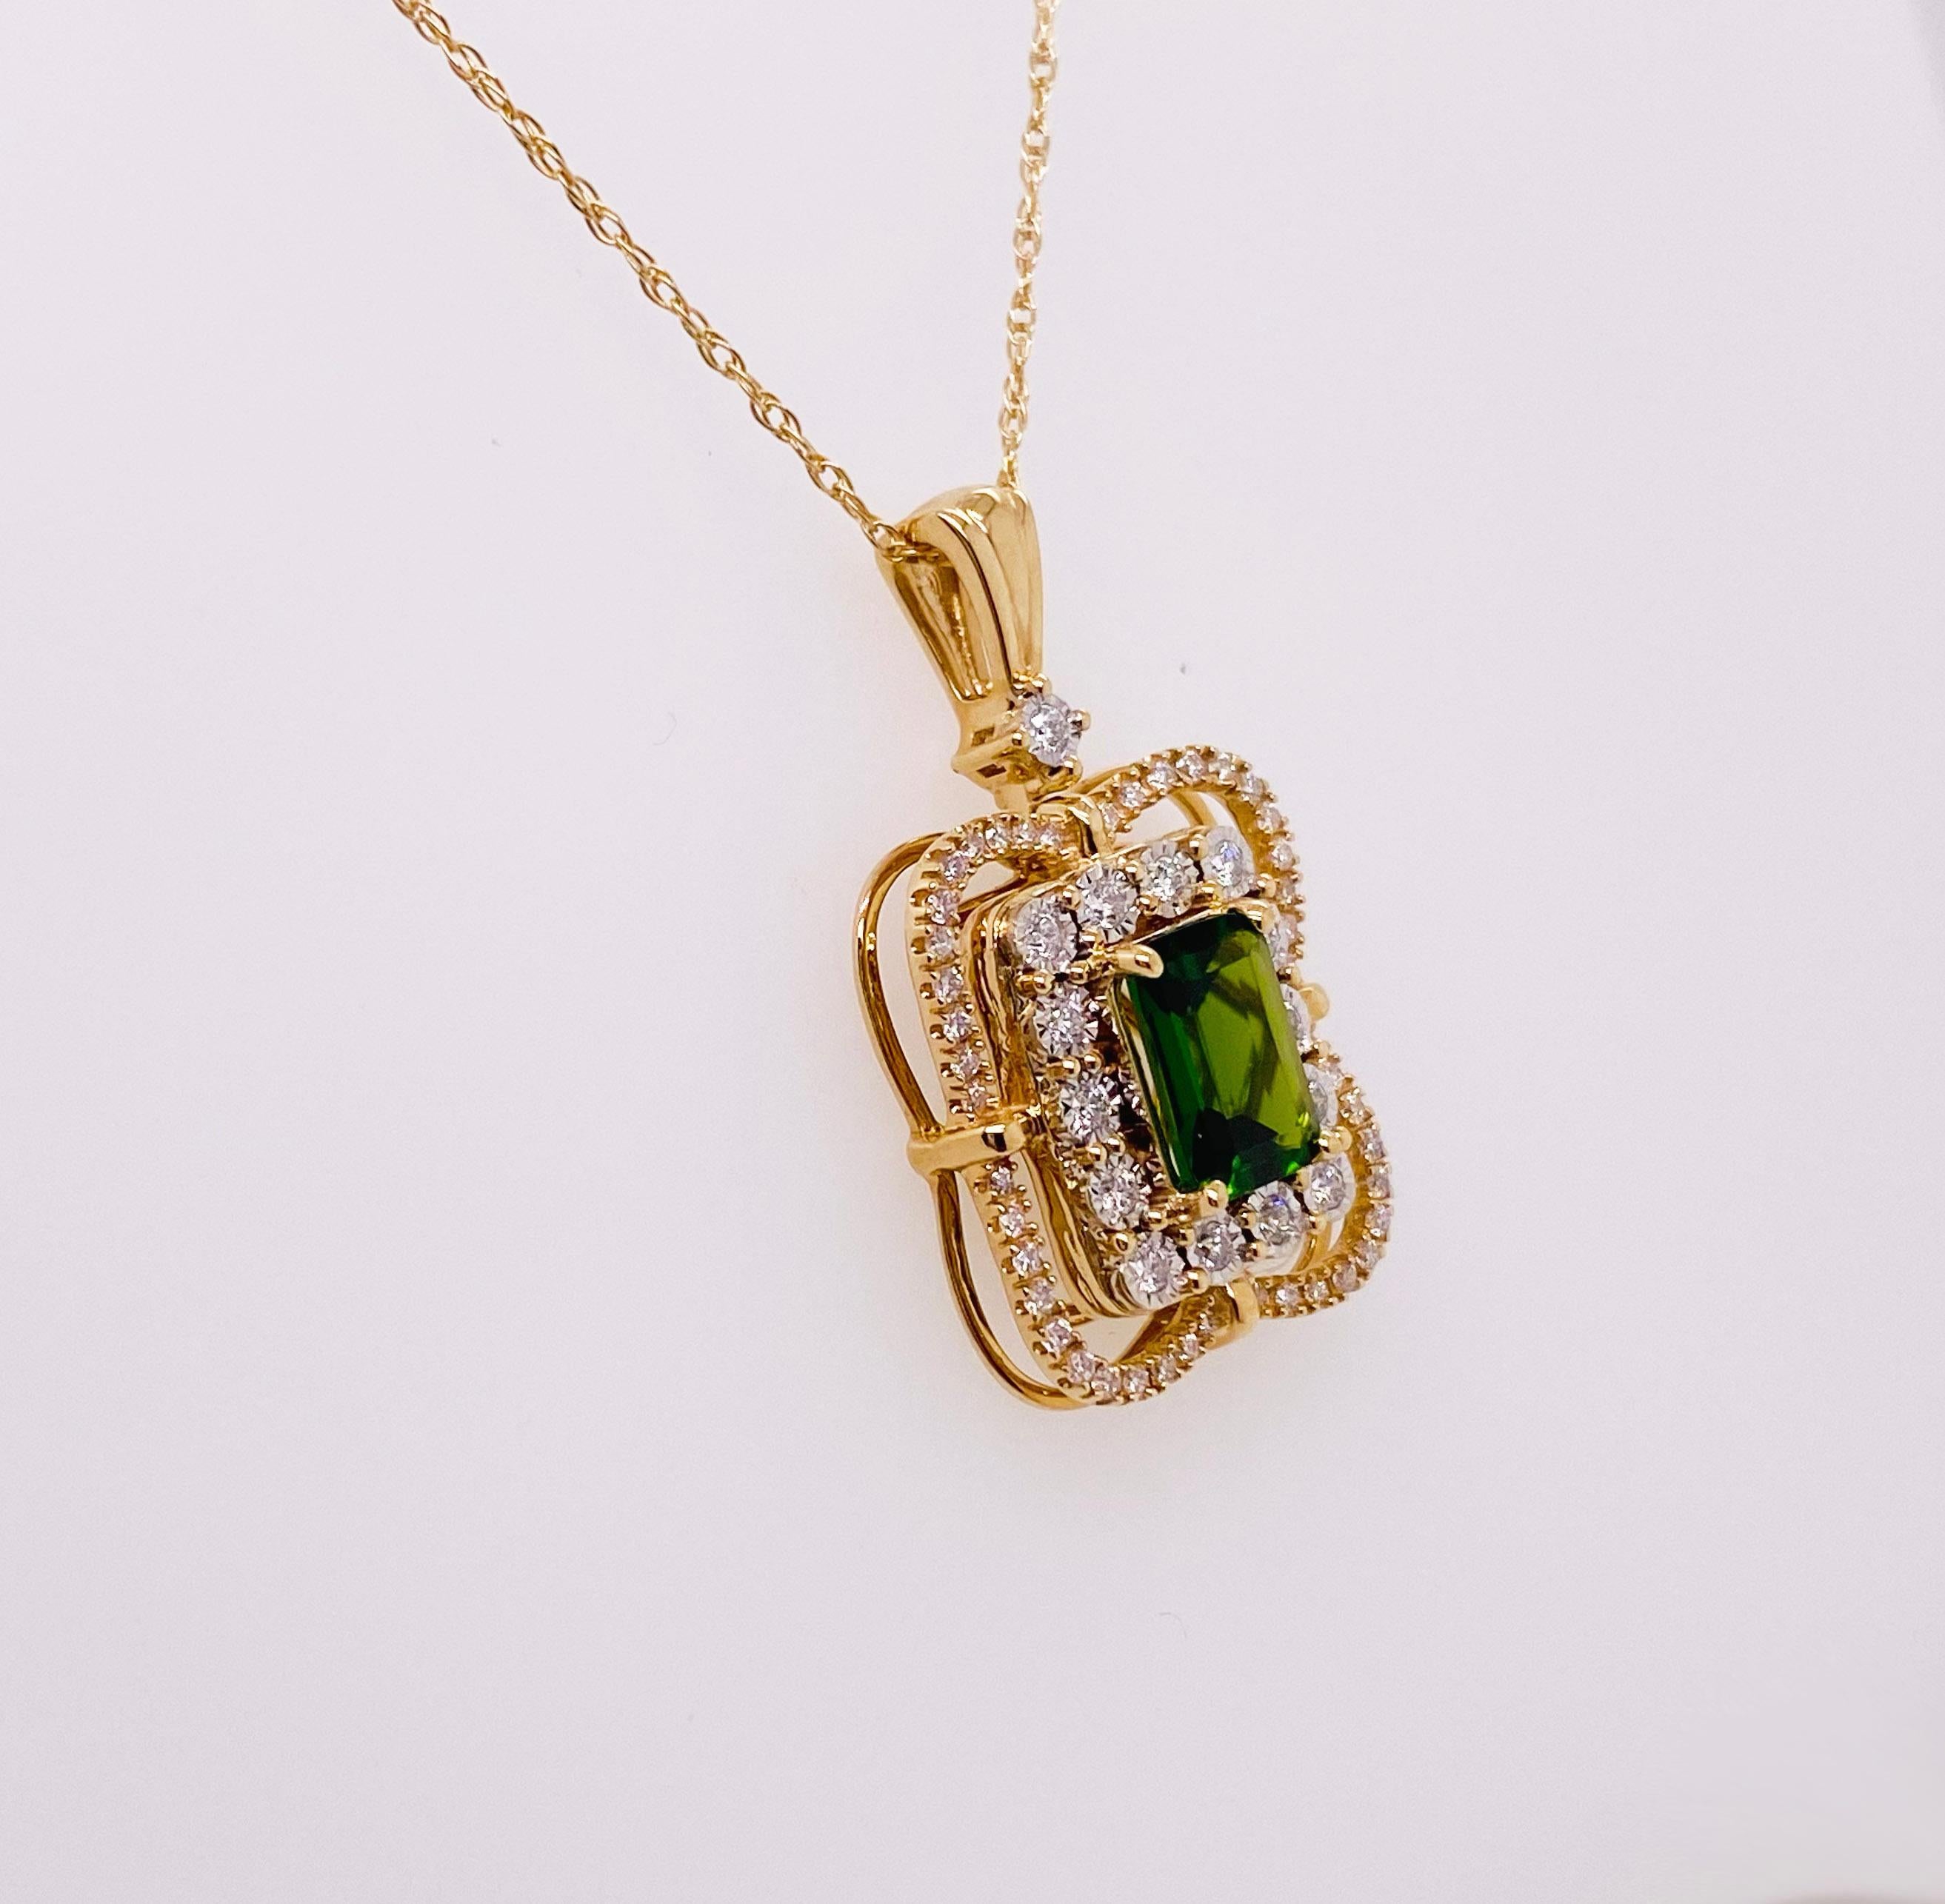 Made for a princess, this necklace has all the details of a beautiful piece! There are two rows of diamonds with one being an emerald shaped halo and the other one more curved and soft. This elegant design is gorgeous and was handcrafted in the USA.